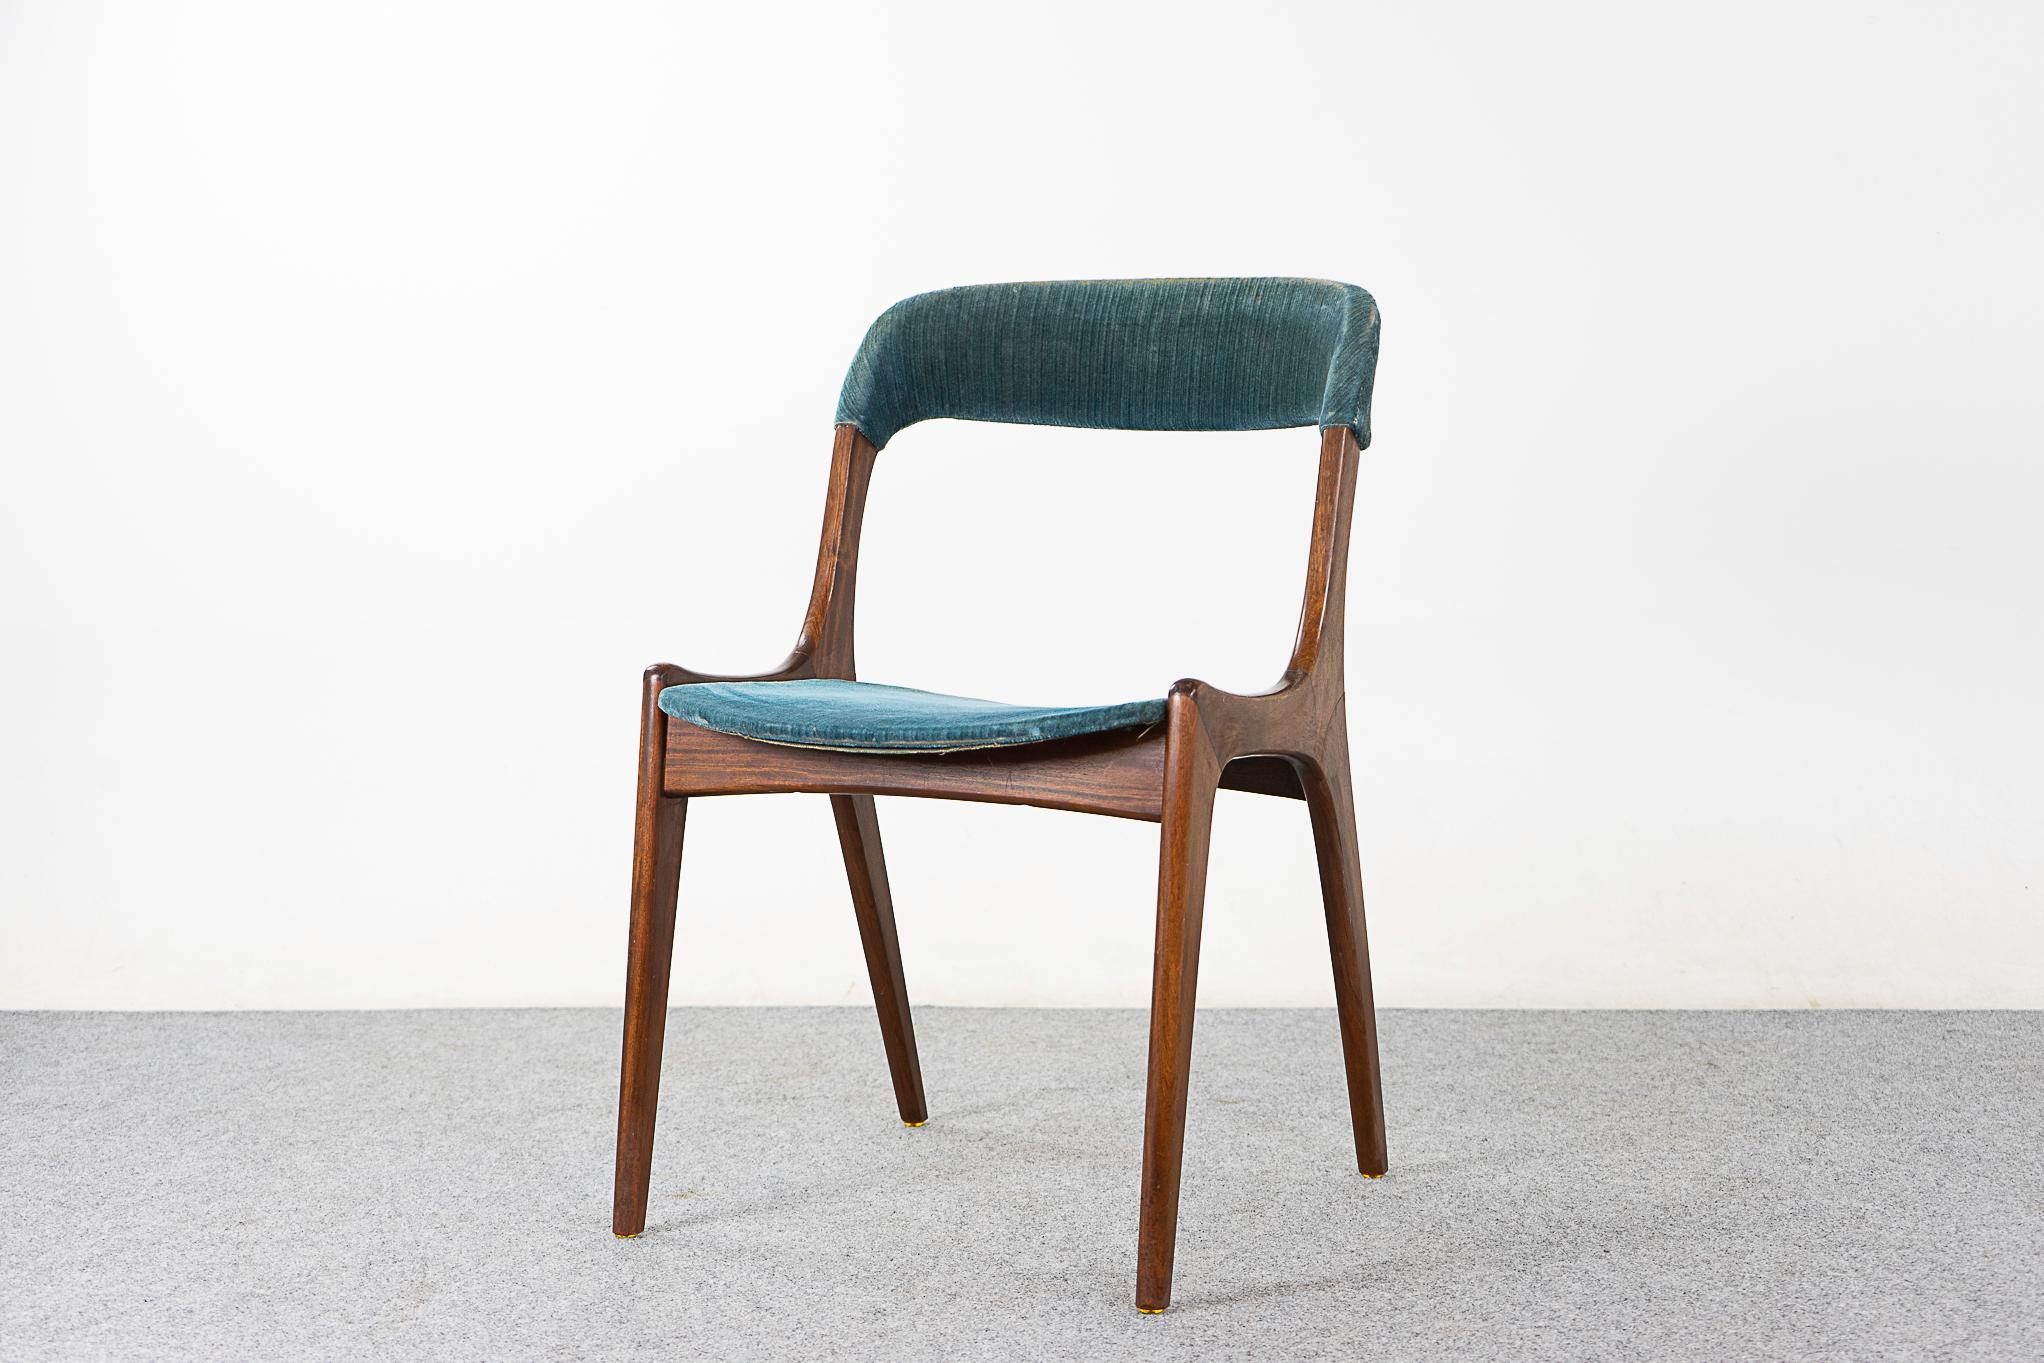 Teak mid-century dining chairs, circa 1960's. Gorgeous sculptural lines, curved backrest and generous seat. Perfect patina on this unique frame, original upholstery with wear and tear. 